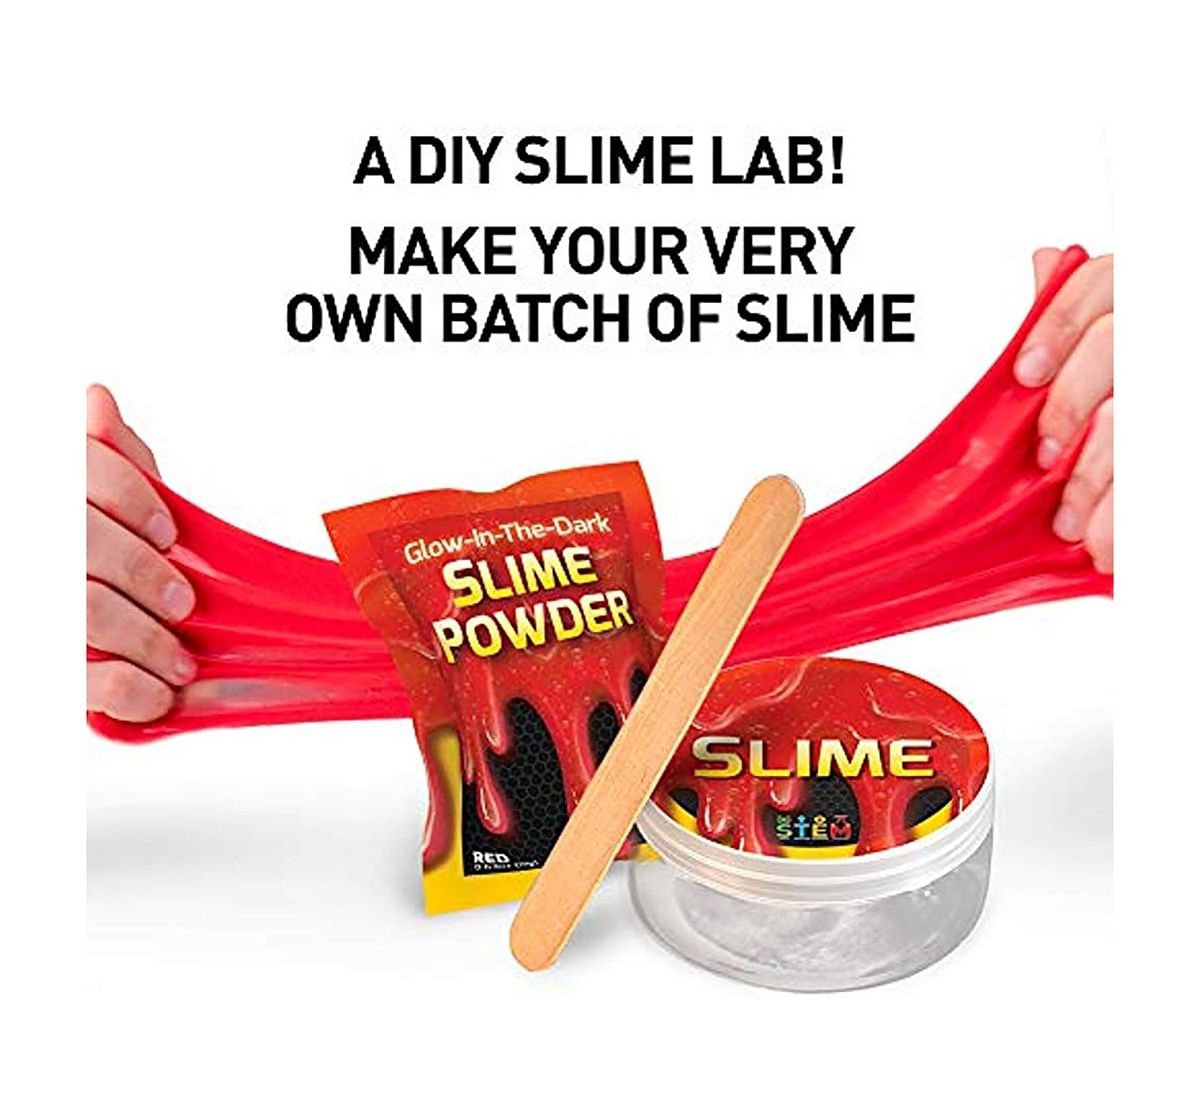  National Geographic Mega Slime and Putty Lab Science Kit for Kids age 8Y+ 